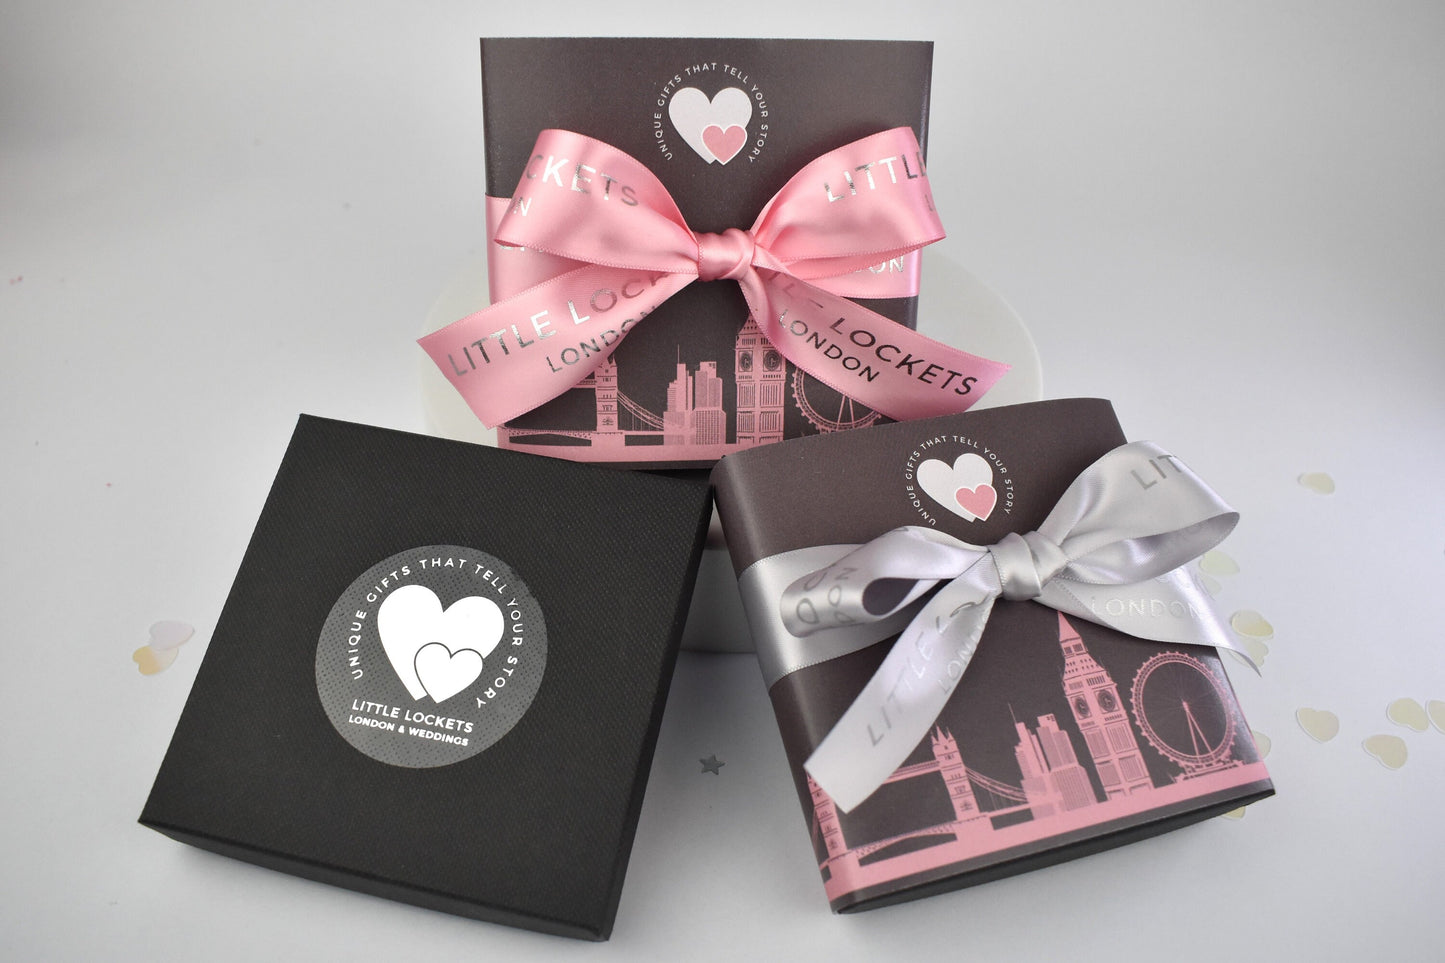 Your gift will arrive in a branded gift box or choose to upgrade to a London Skyline wrap with hand tied pink or grey branded ribbon